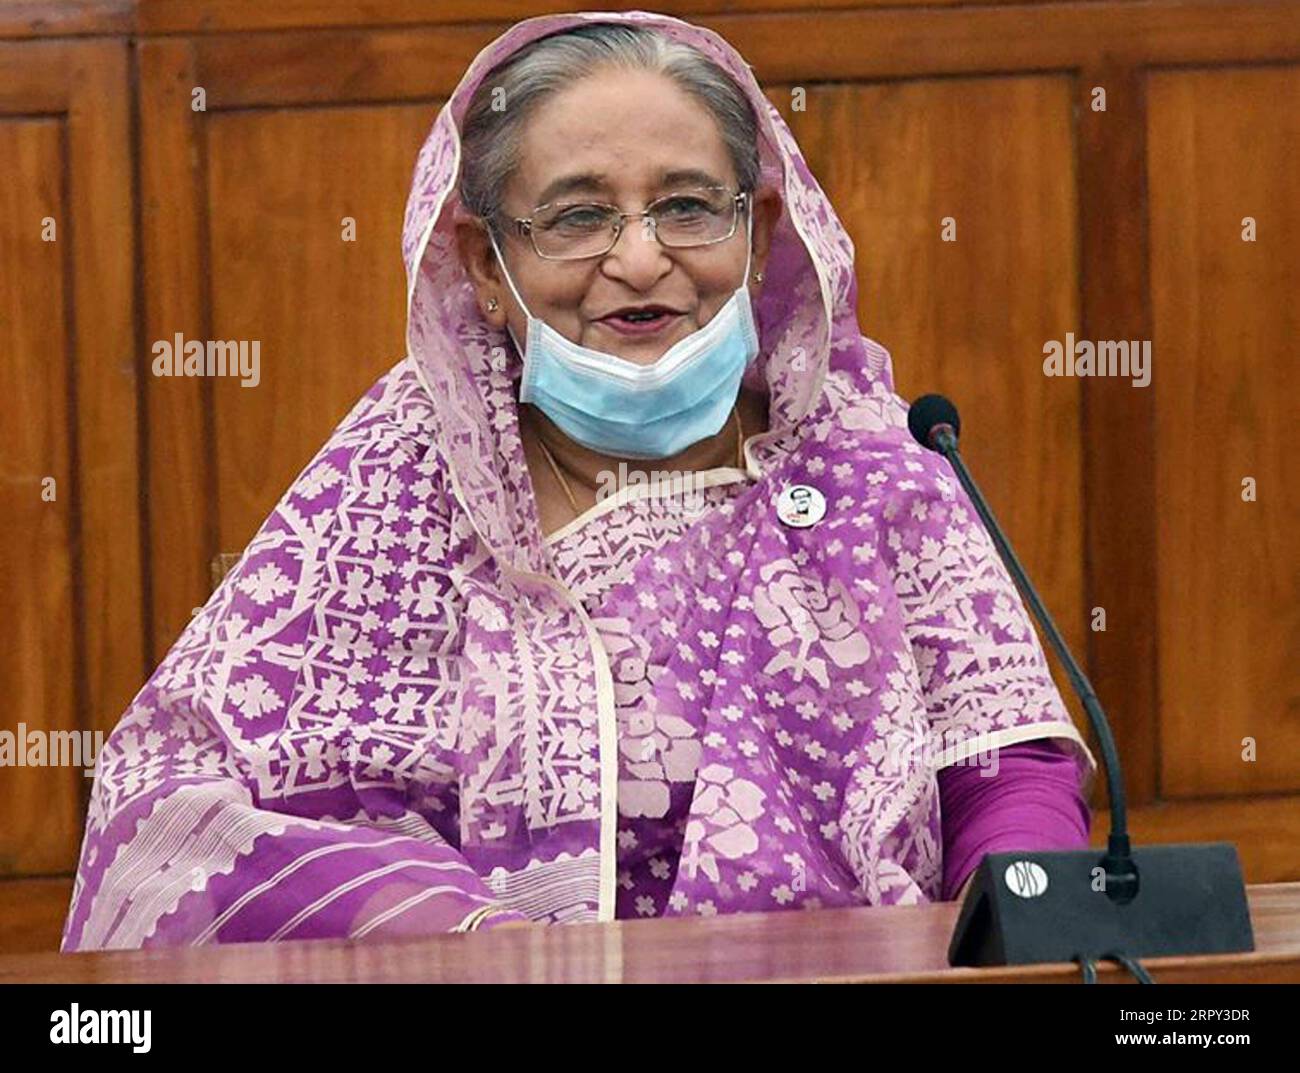 200612 -- DHAKA, June 12, 2020 Xinhua -- Bangladeshi Prime Minister Sheikh Hasina speaks in parliament in Dhaka, Bangladesh on June 11, 2020. The Bangladeshi government has unveiled a record 5.68-trillion-taka about 66.9 billion U.S. dollars national budget for the 2020-21 fiscal year starting from July. PID/Handout via Xinhua BANGLADESH-DHAKA-NATIONAL BUDGET PUBLICATIONxNOTxINxCHN Stock Photo